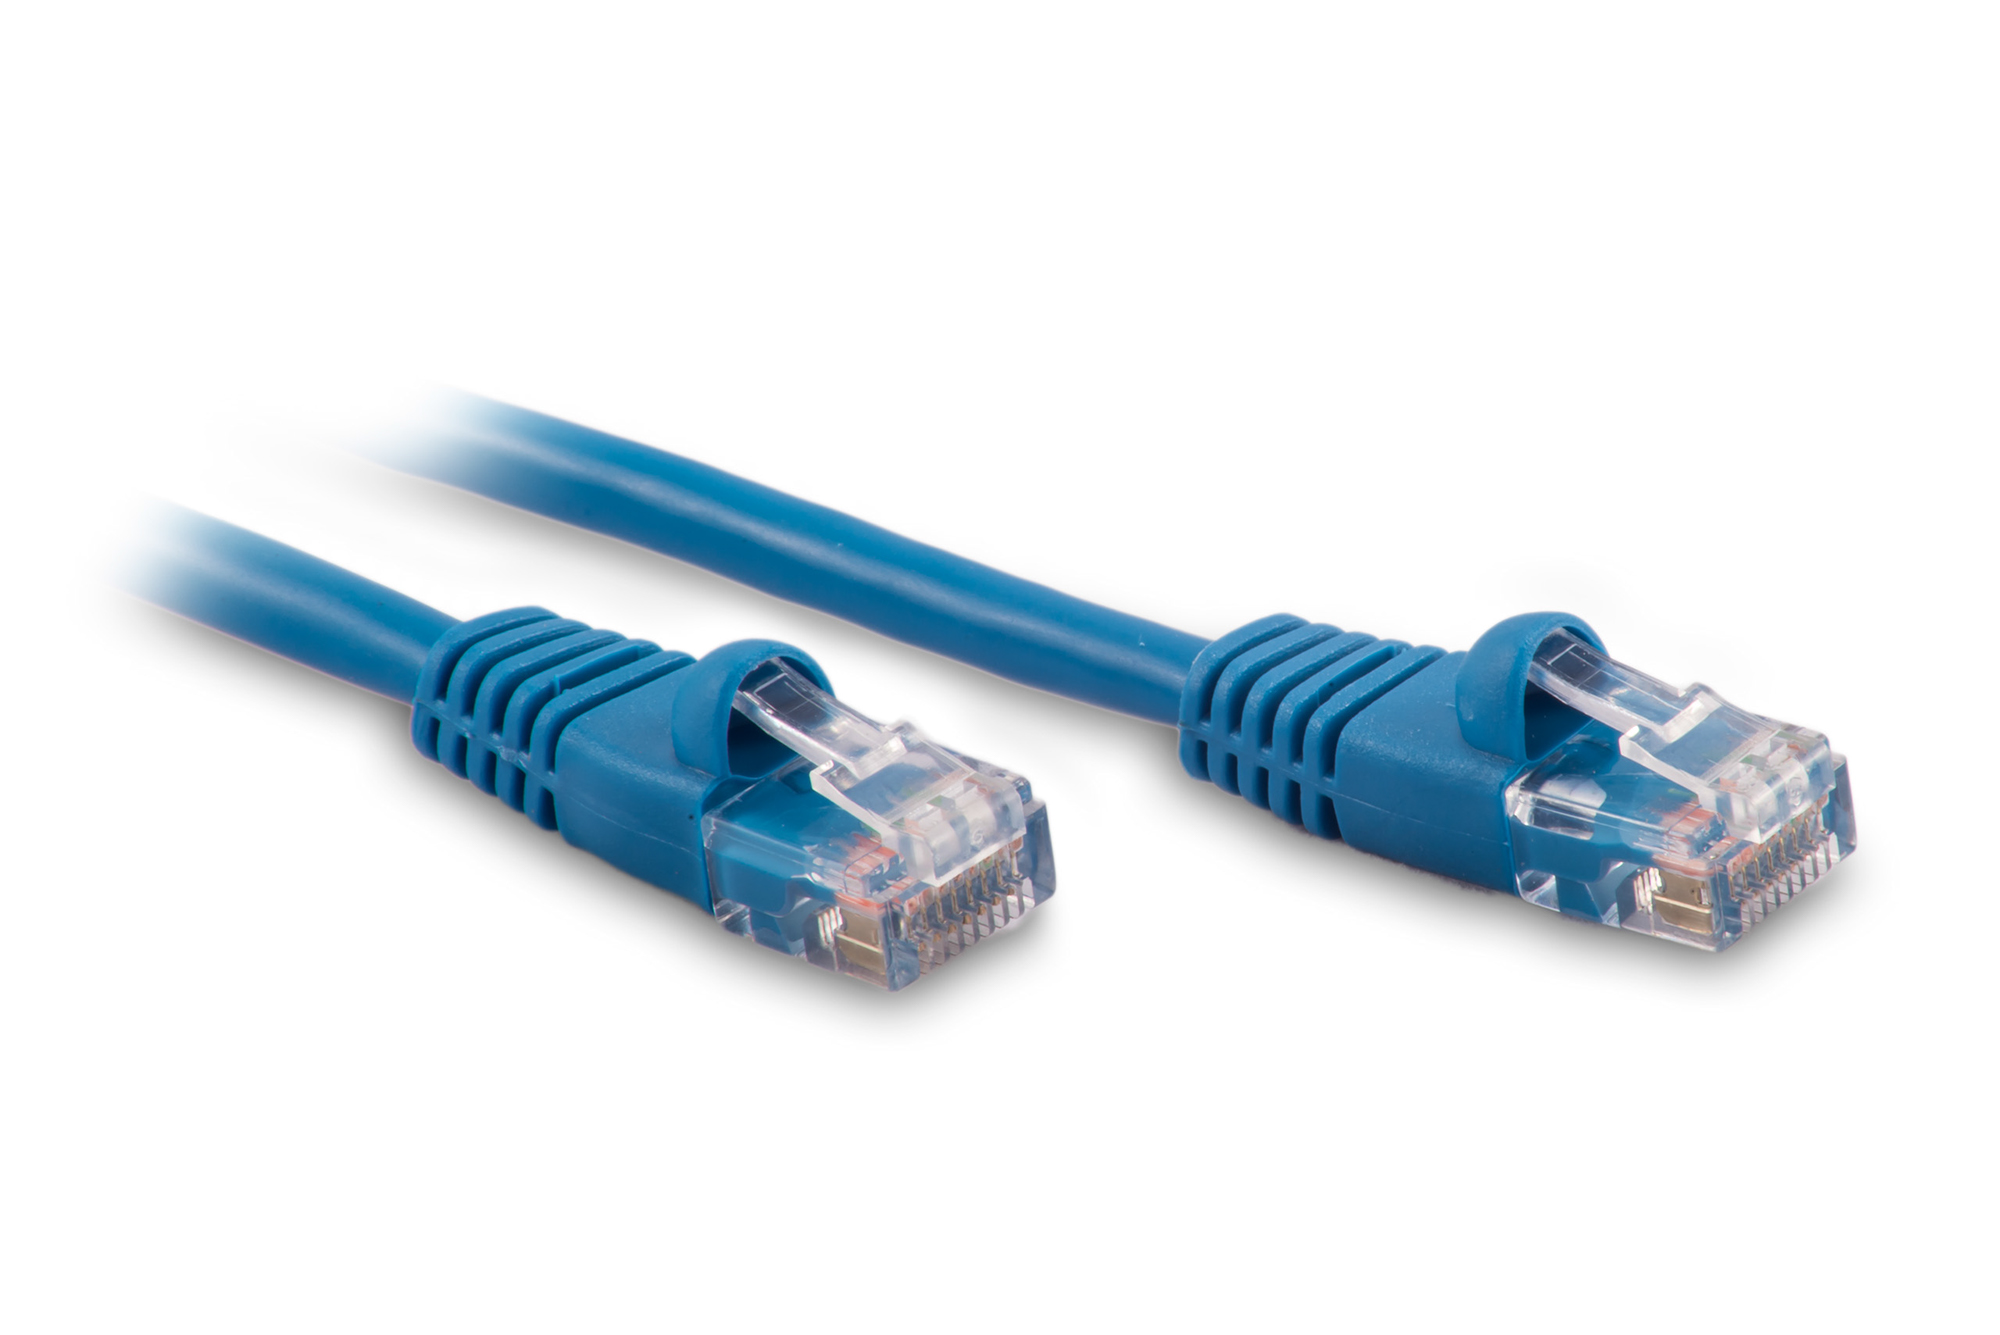 5ft Cat5e Ethernet Patch Cable - Blue Color - Snagless Boot, Stranded, RJ45, 350Mhz, 24AWG